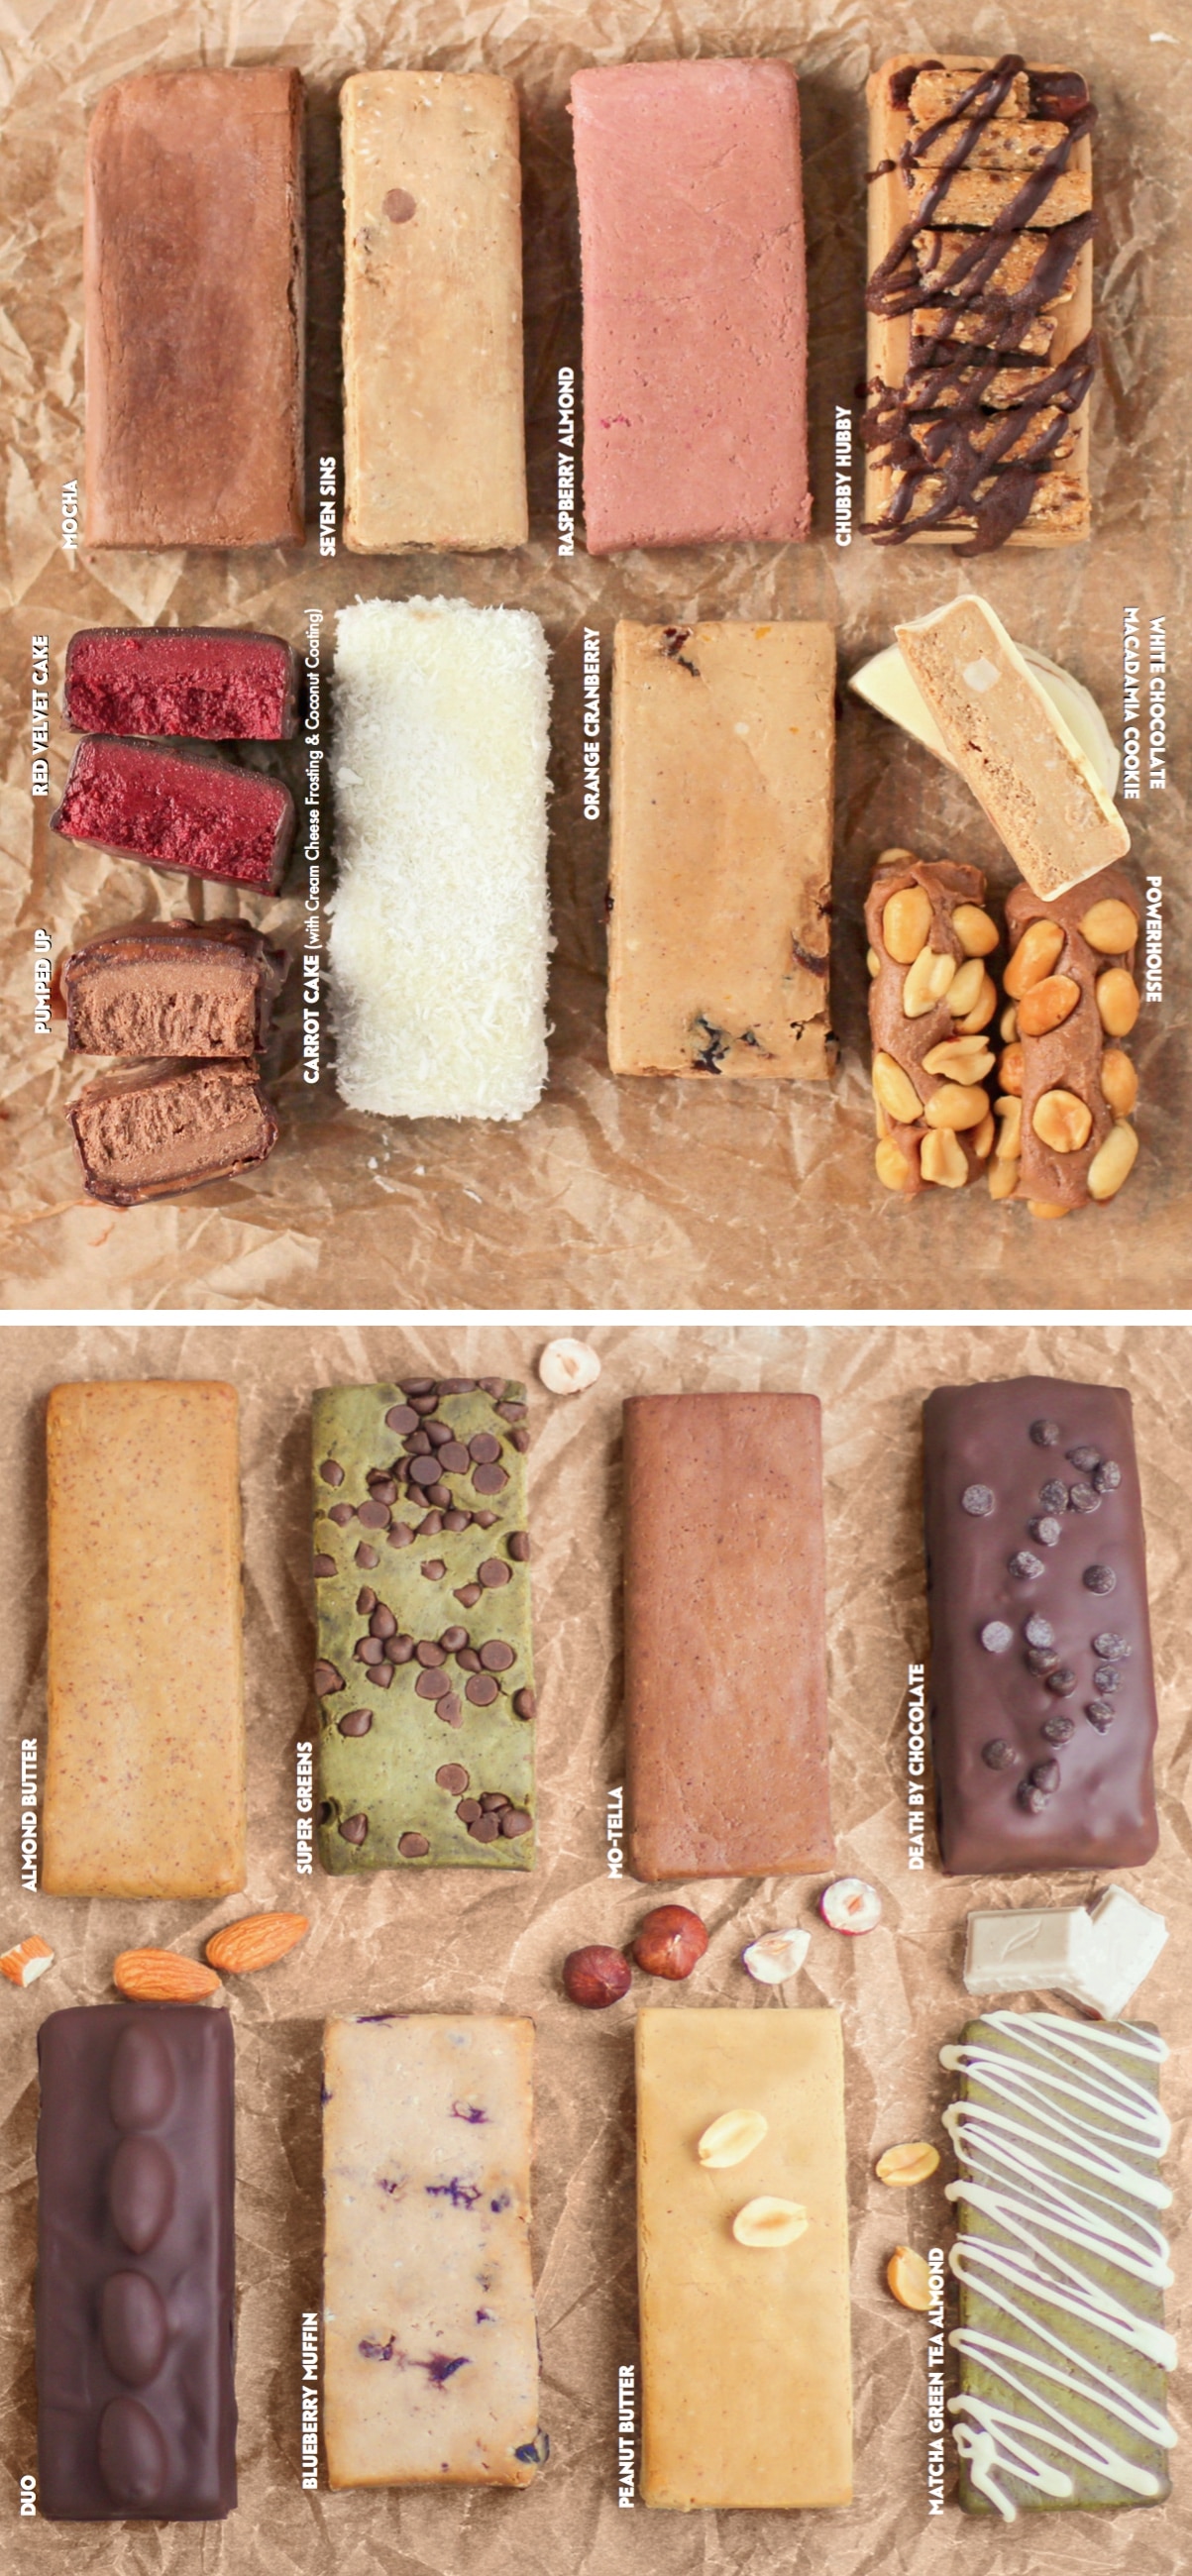 A sneak preview of inside the DIY Protein Bars Cookbook! Authored by Jessica Stier of Desserts with Benefits